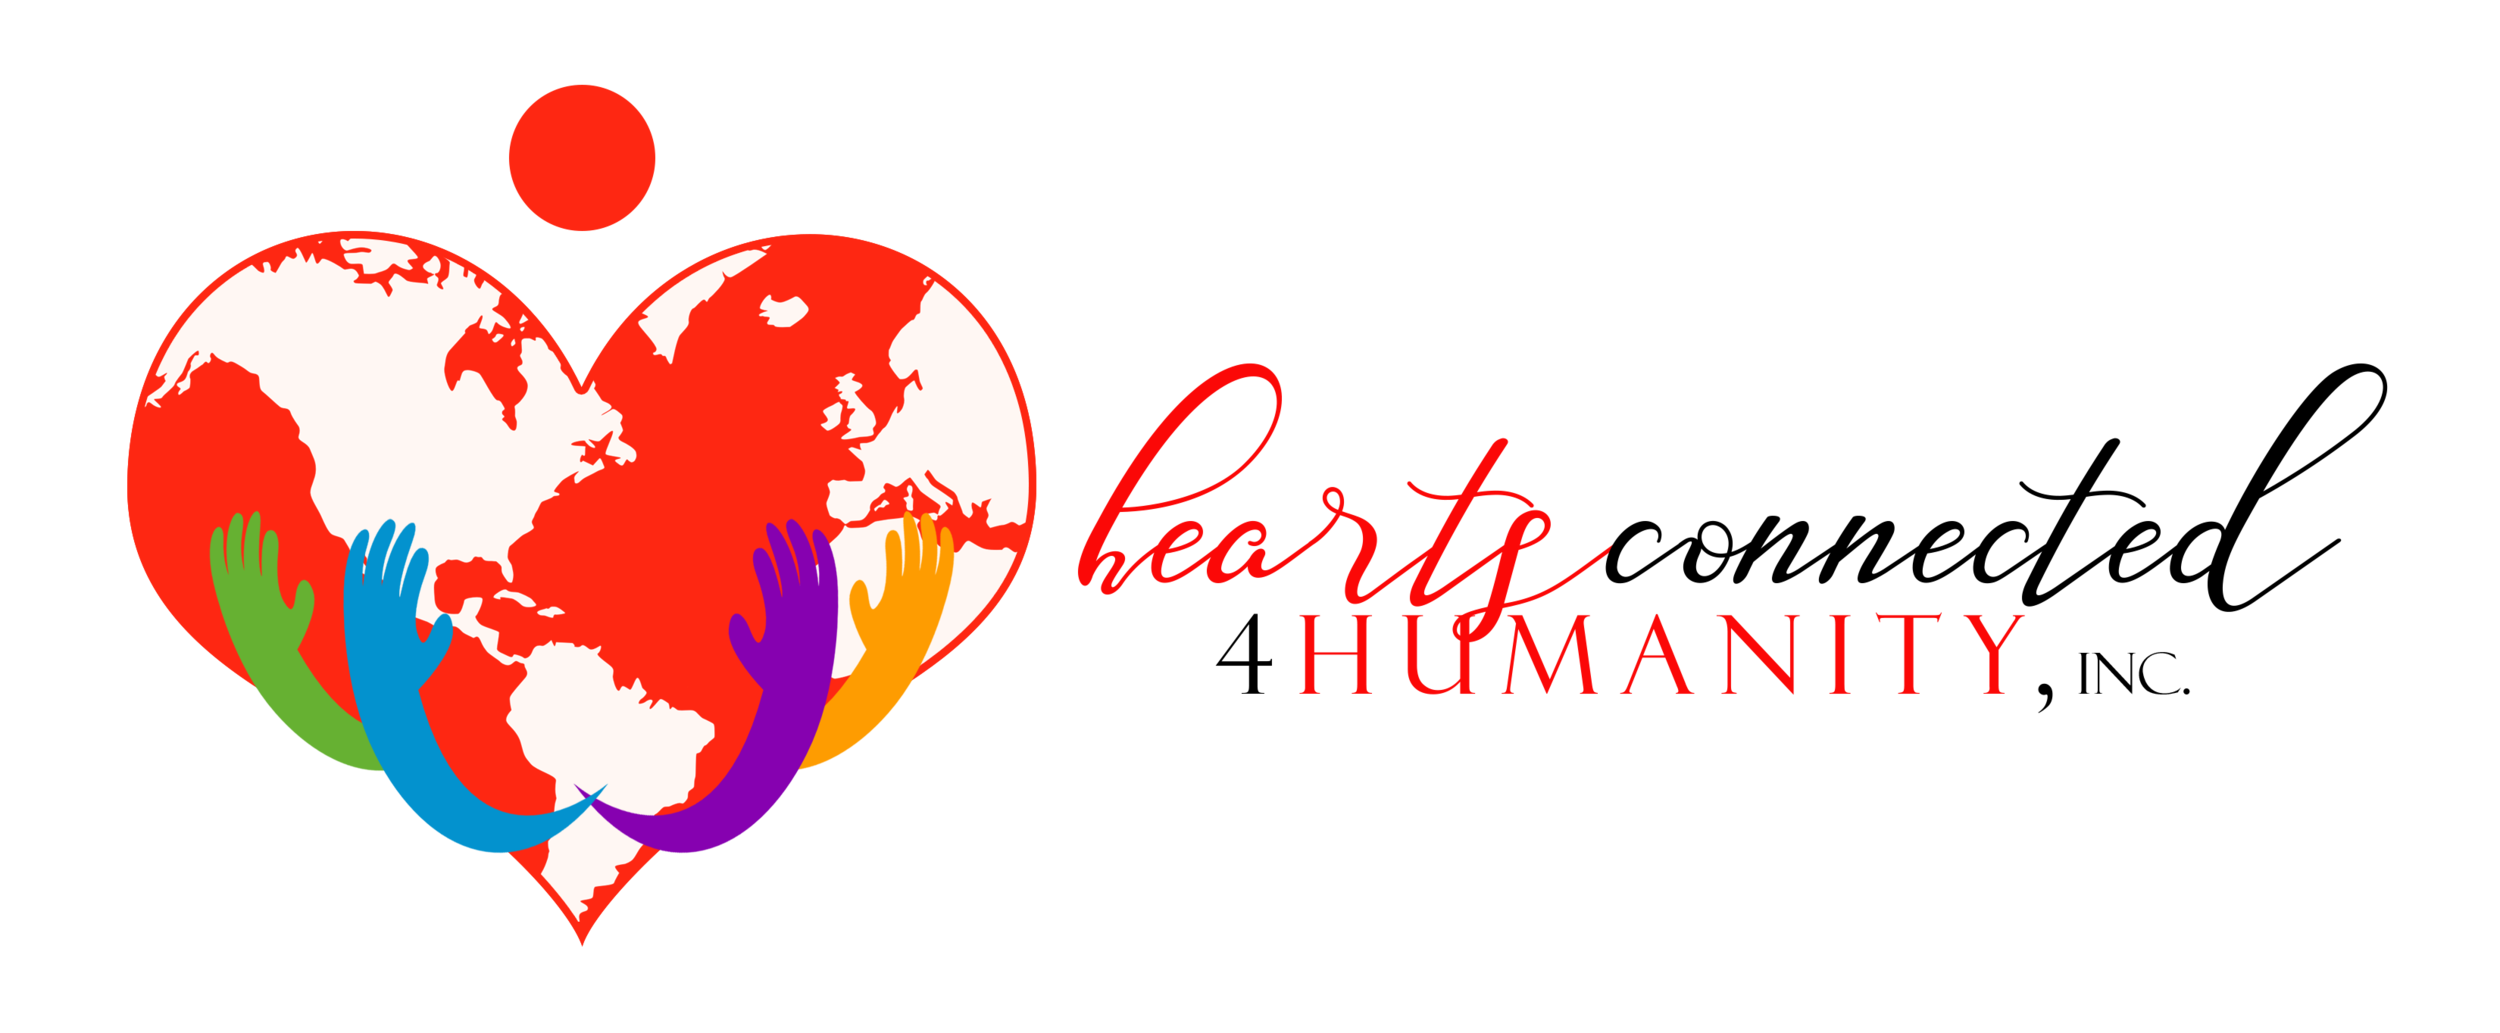 Hearts Connected 4 Humanity